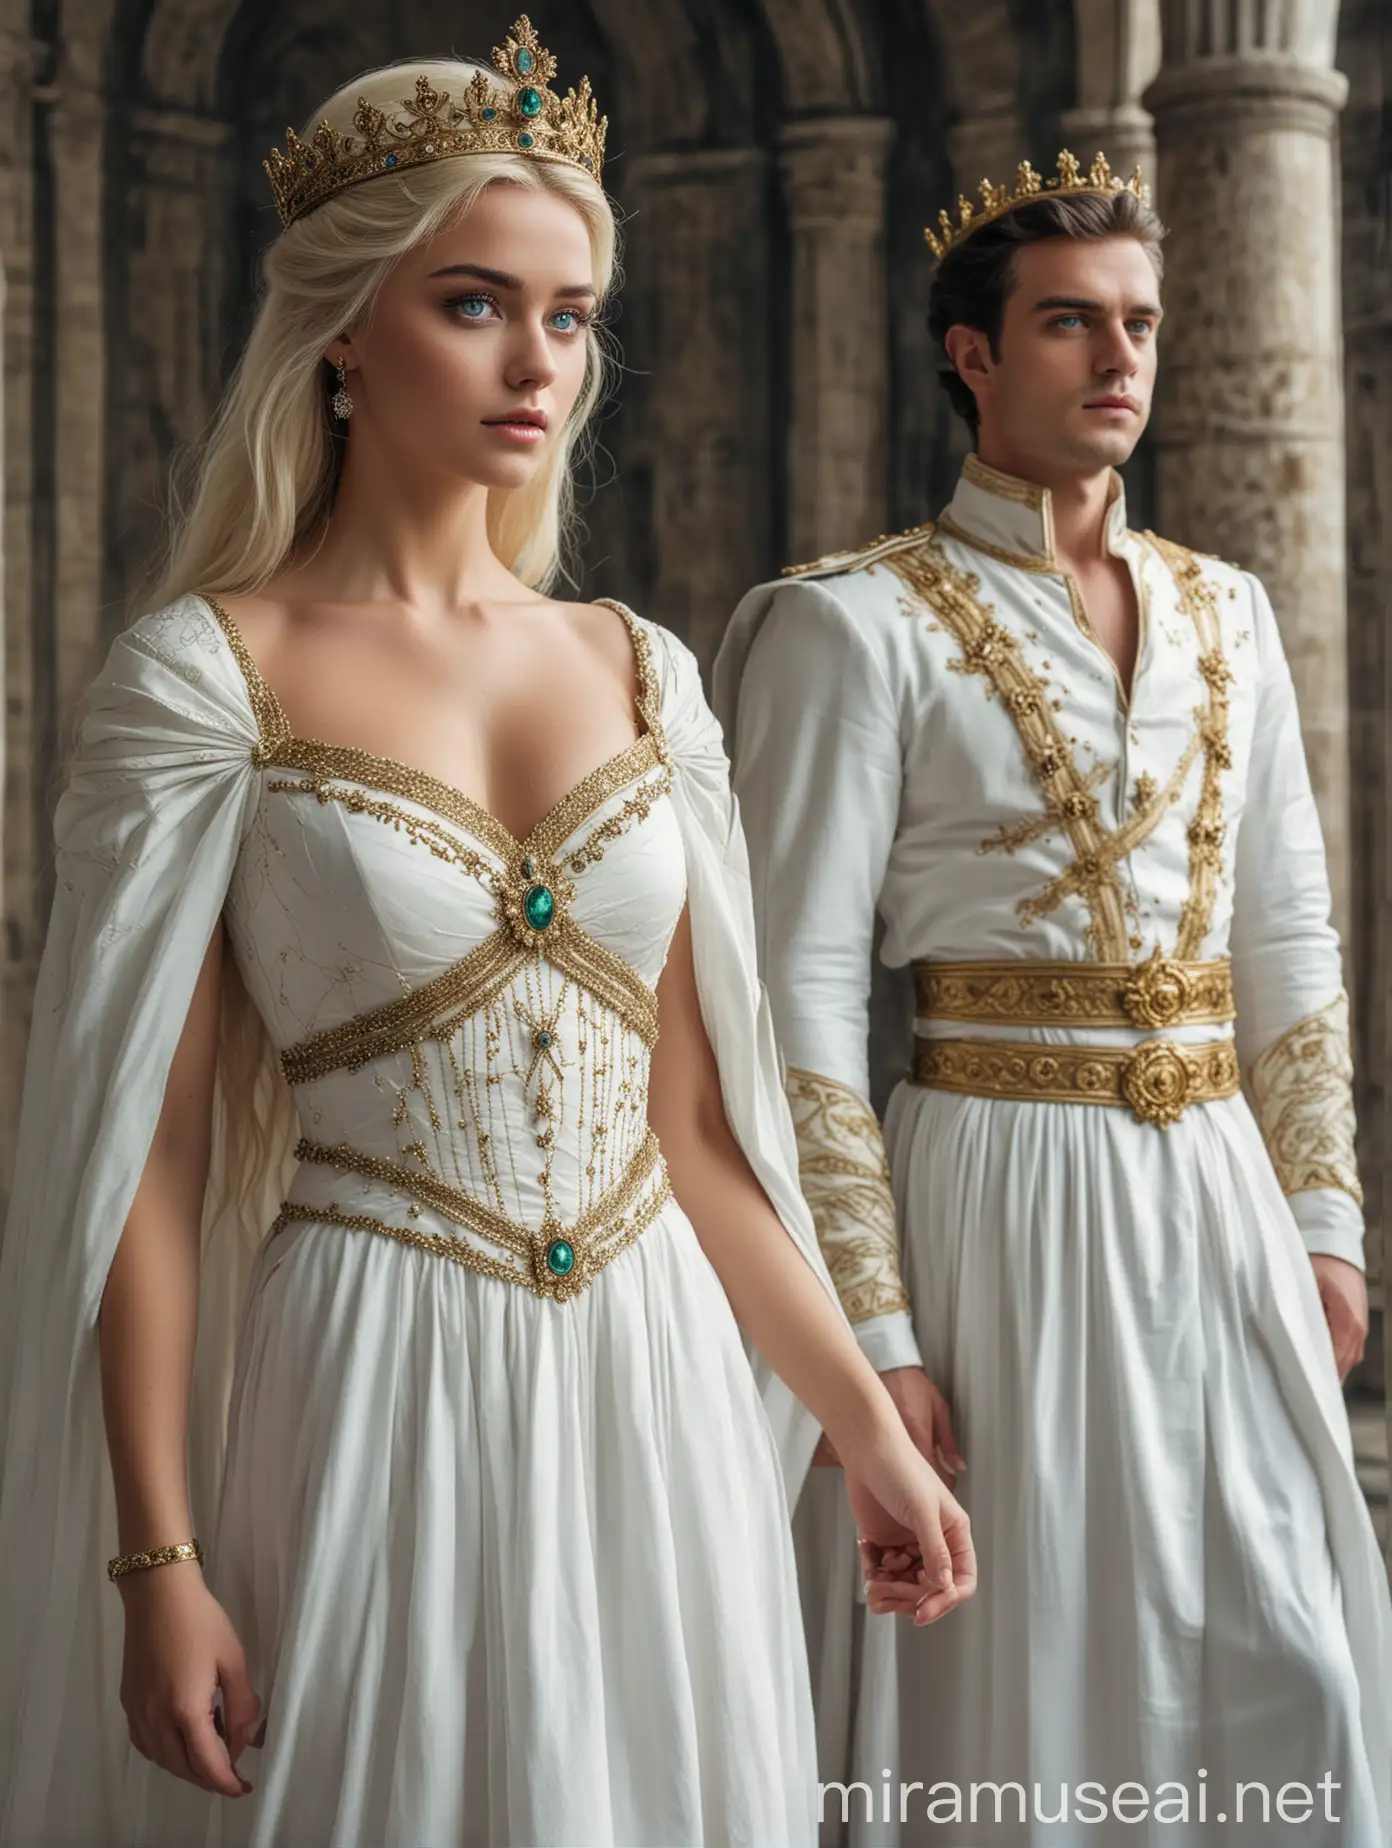 Elegant Queen and Handsome King in Royal Attire Portrait